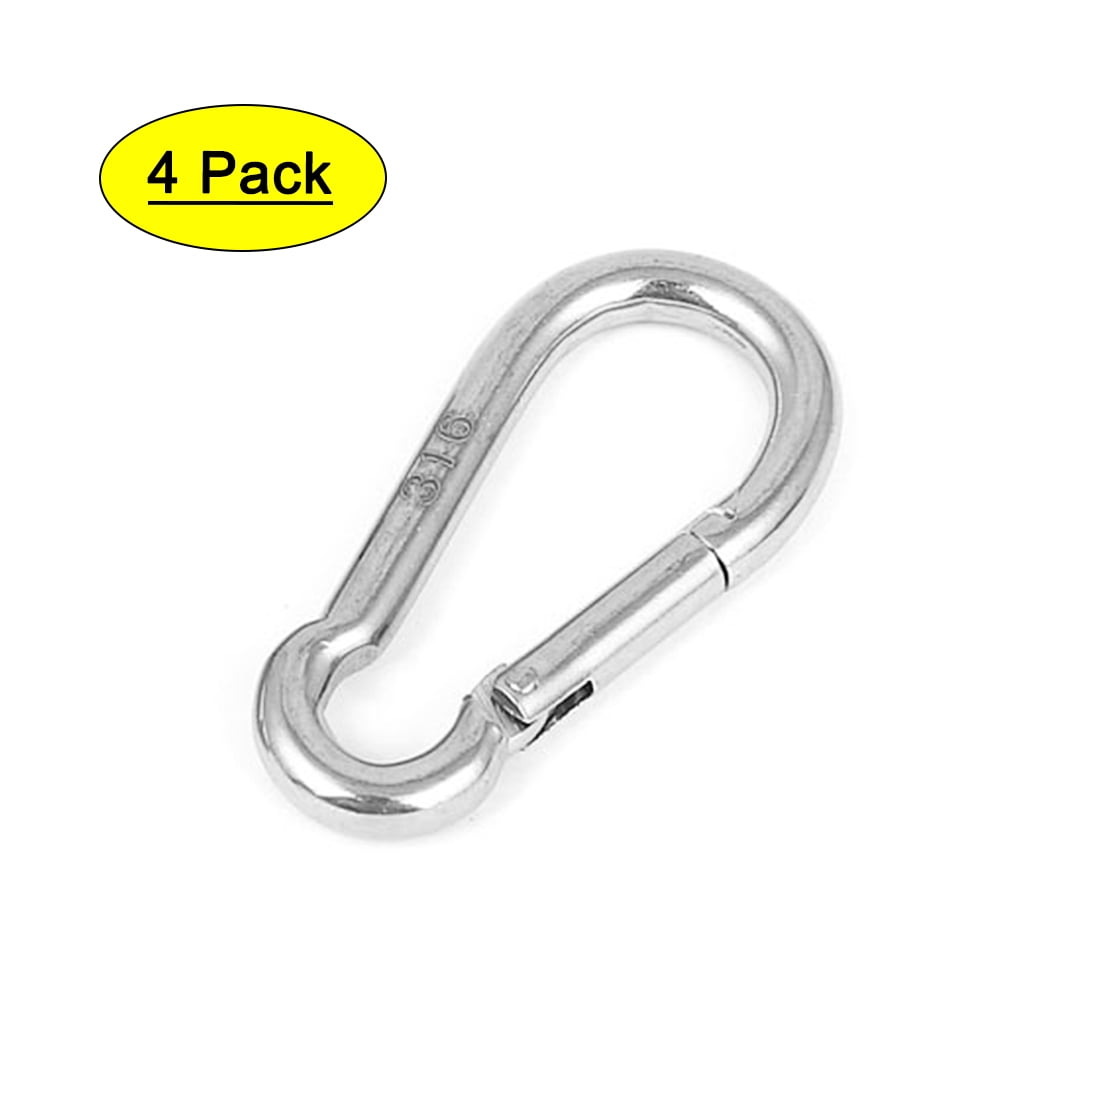 Rubber Coated Stainless Steel Carabiner Hook It Clips